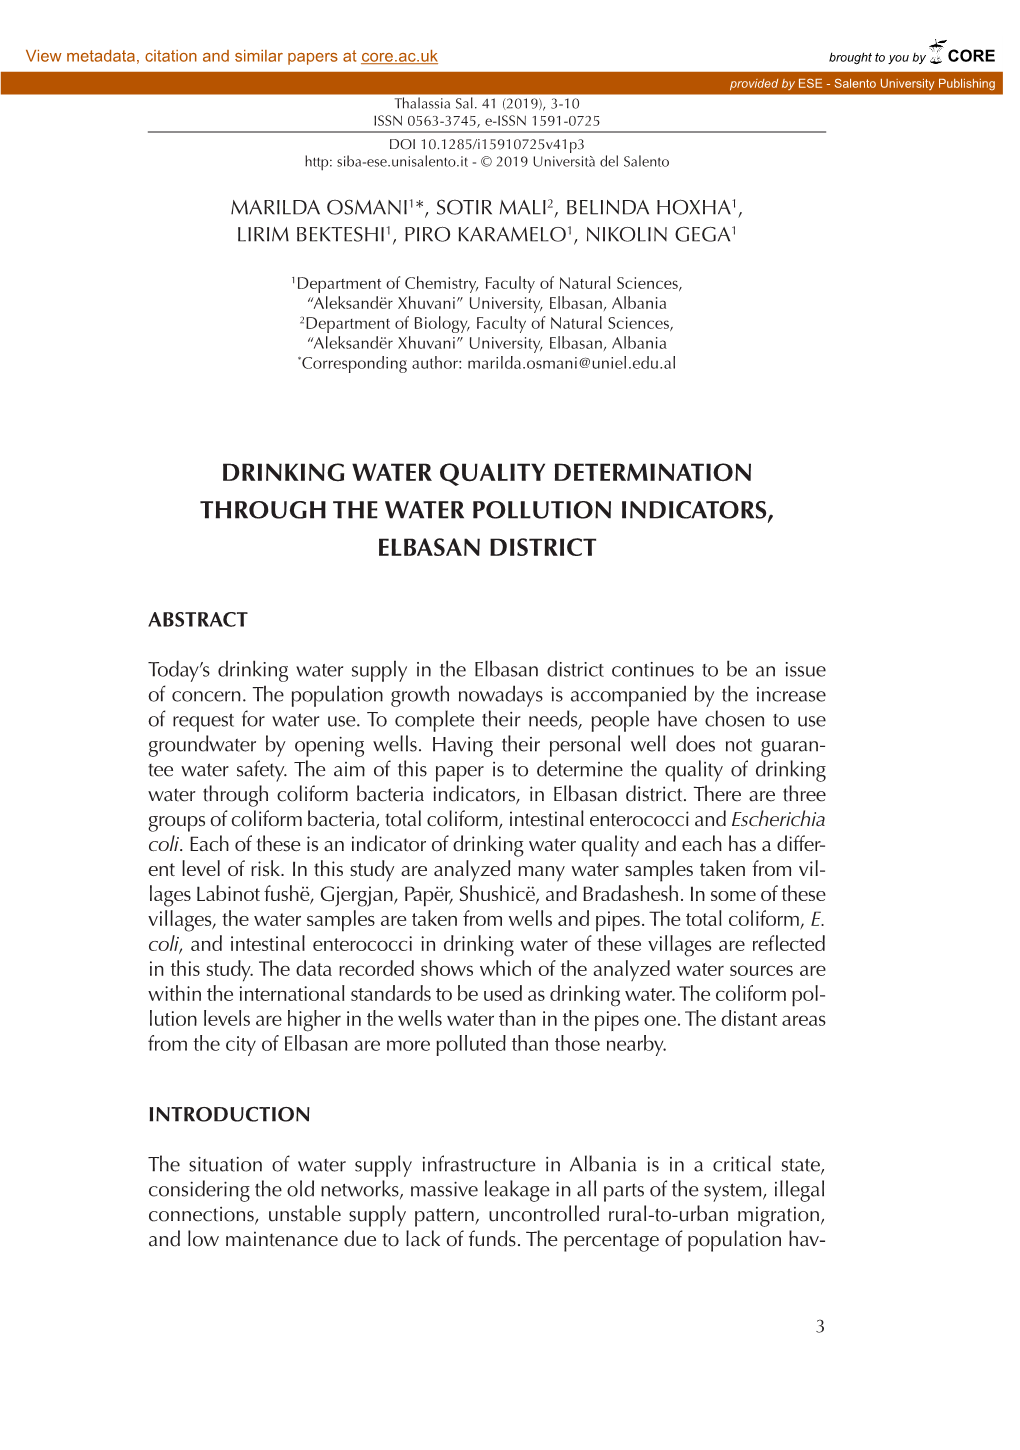 Drinking Water Quality Determination Through the Water Pollution Indicators, Elbasan District